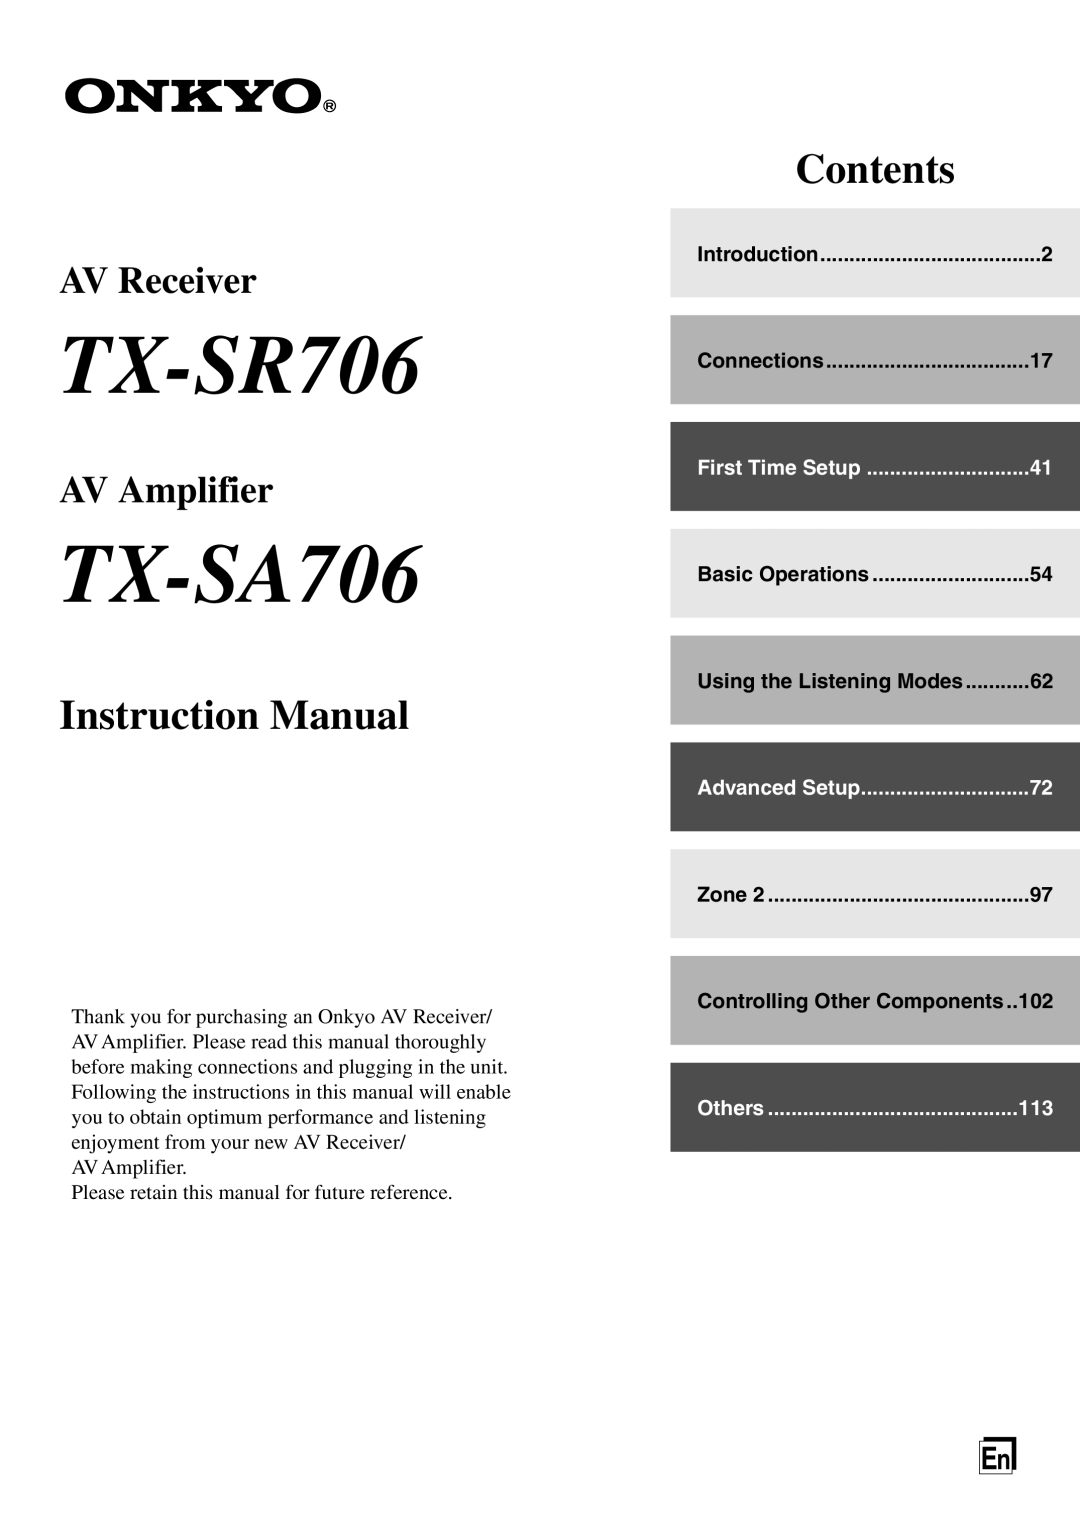 Onkyo TX-SA706 instruction manual Using the Listening Modes, Controlling Other Components, TX-SR706, Contents, AV Receiver 